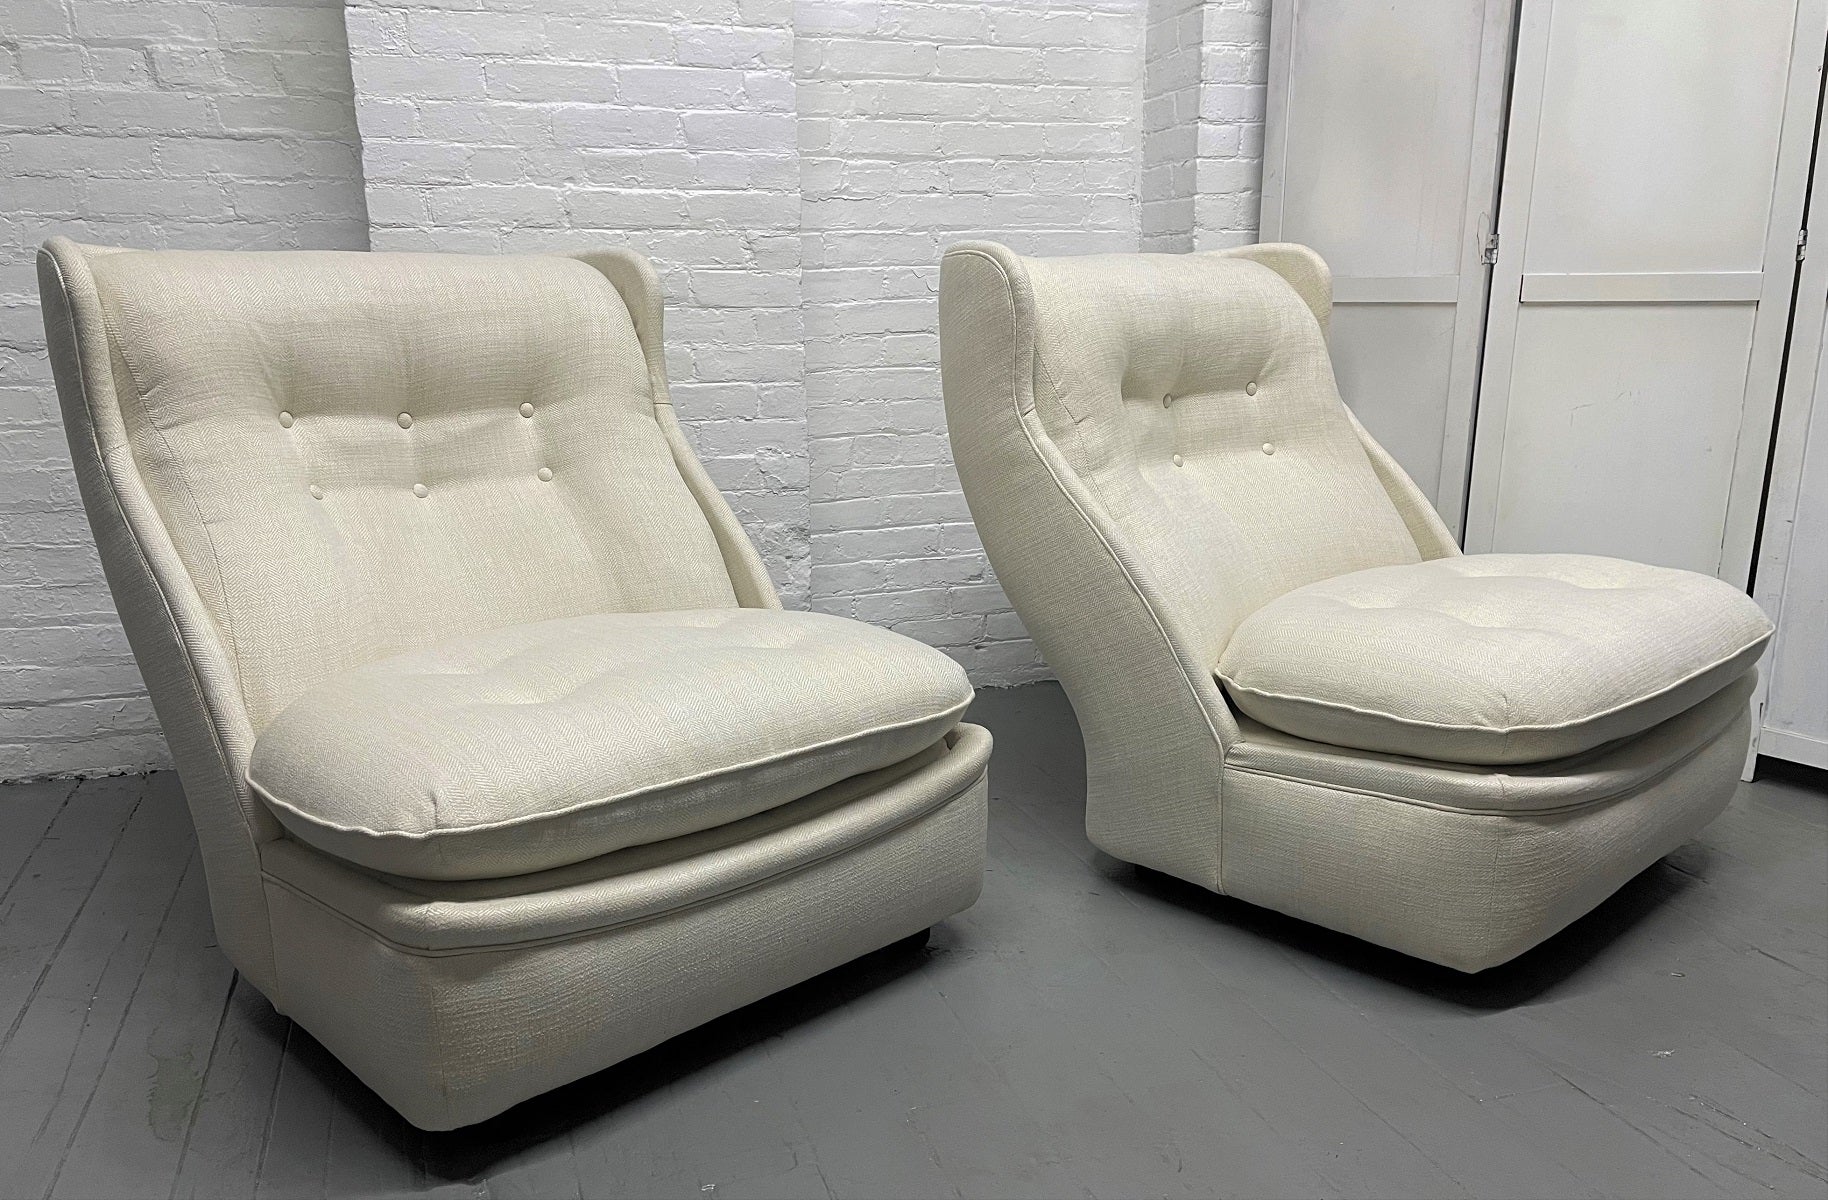 Pair of 1960s oversized slipper lounge chairs. The chairs are newly upholstered with black lacquered legs.